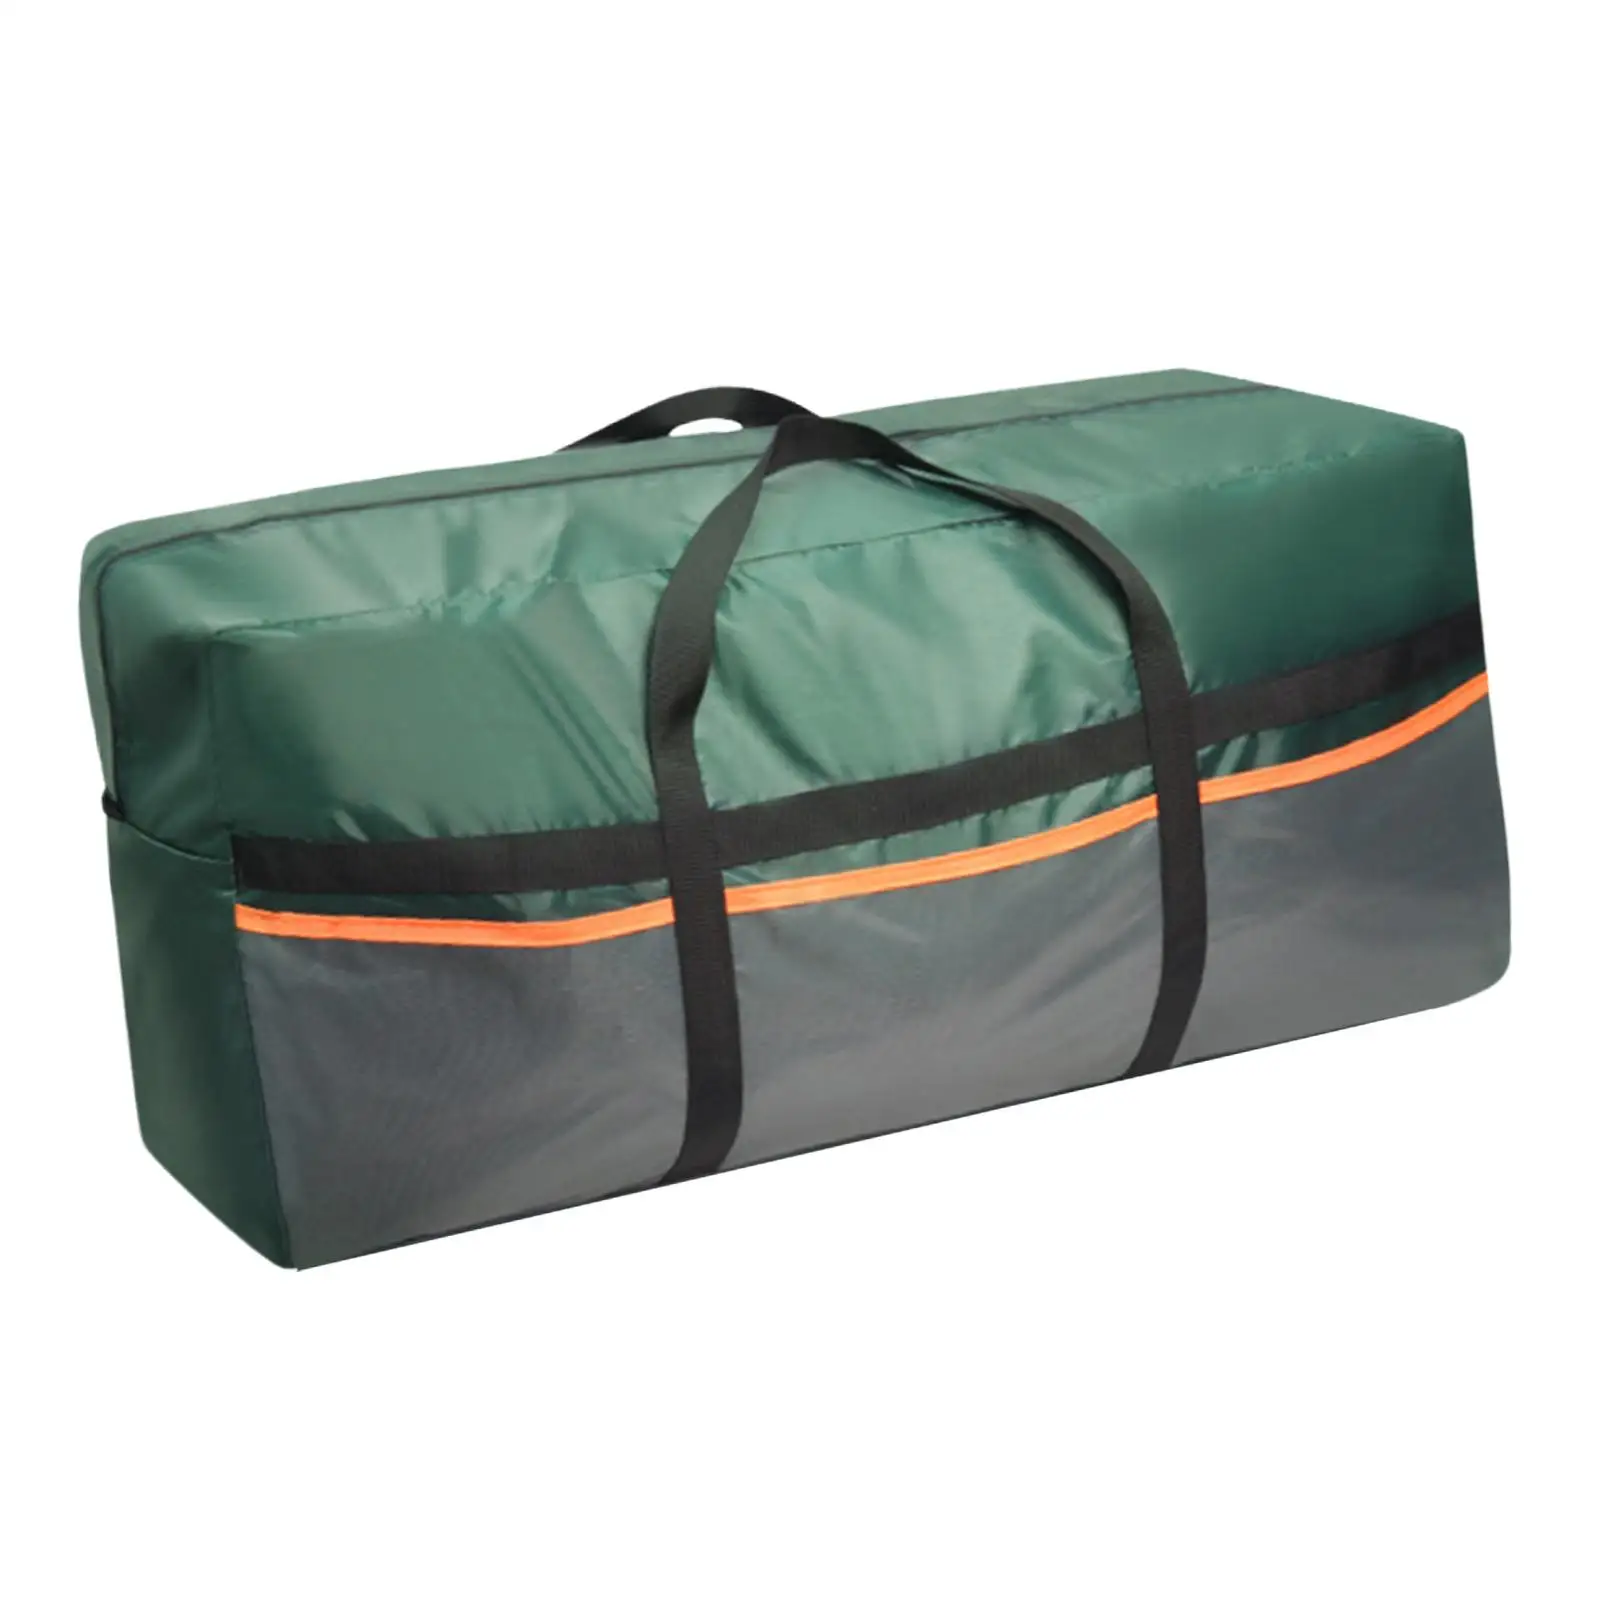 Tent Storage Bag Durable Lightweight Carrying Bag Clothes Bags Case Zippered Duffel Bag for Travel Picnic Hiking Work Equipment